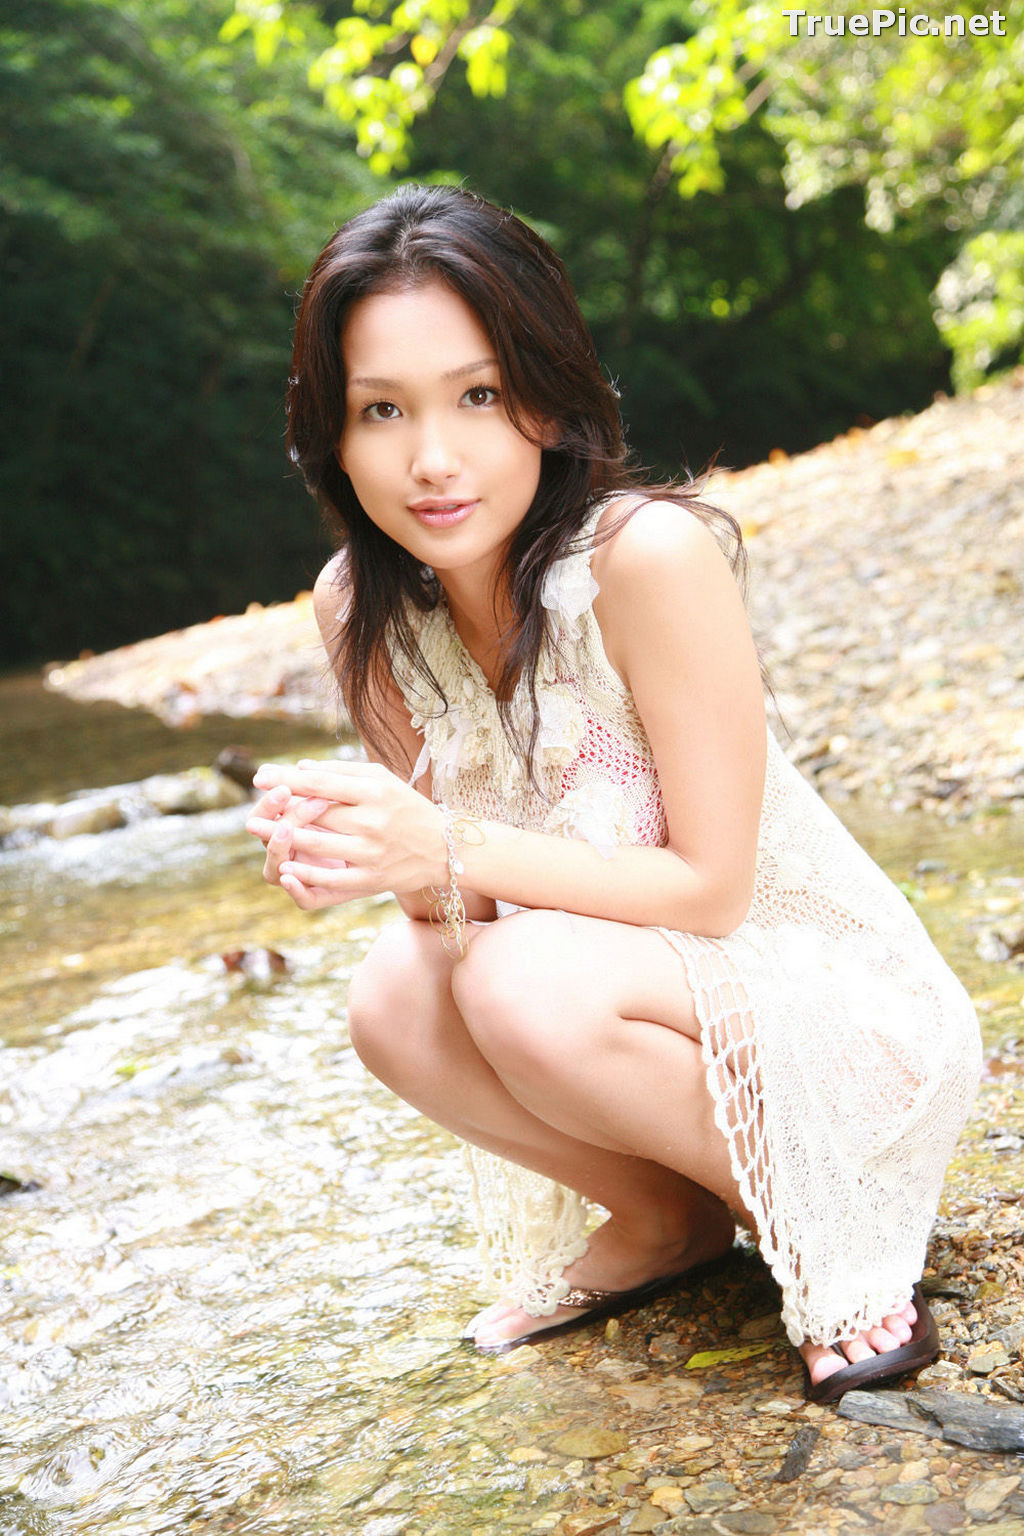 Image DGC No.378 - Japanese Glamour Model and Actress - Reon Kadena - TruePic.net - Picture-16